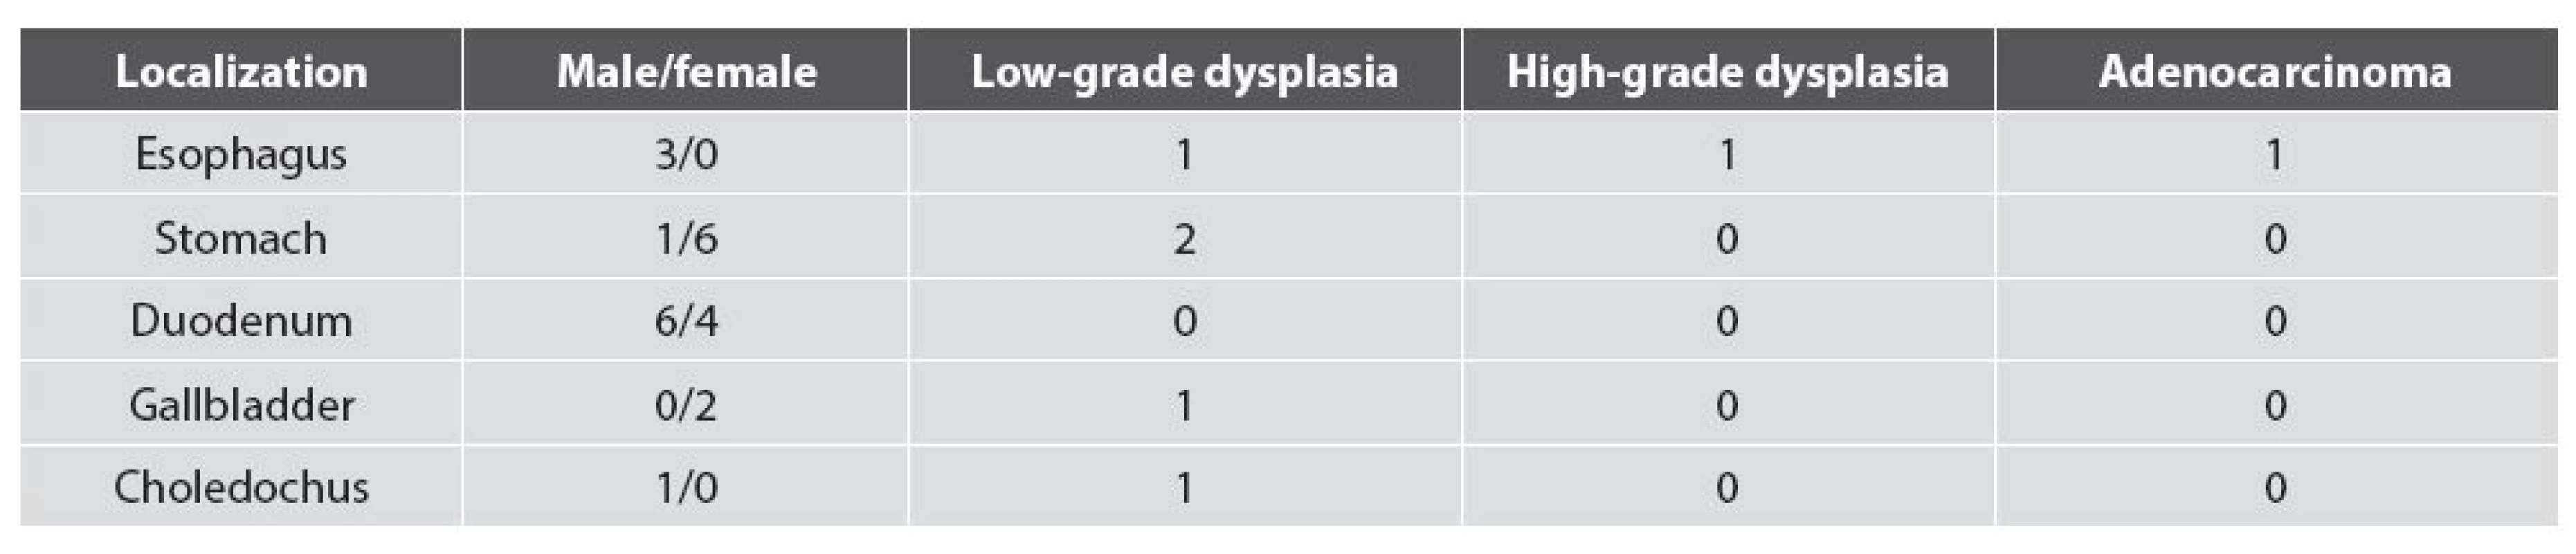 Pyloric gland adenomas. Localizations, gender, and occurrence of dysplasia.